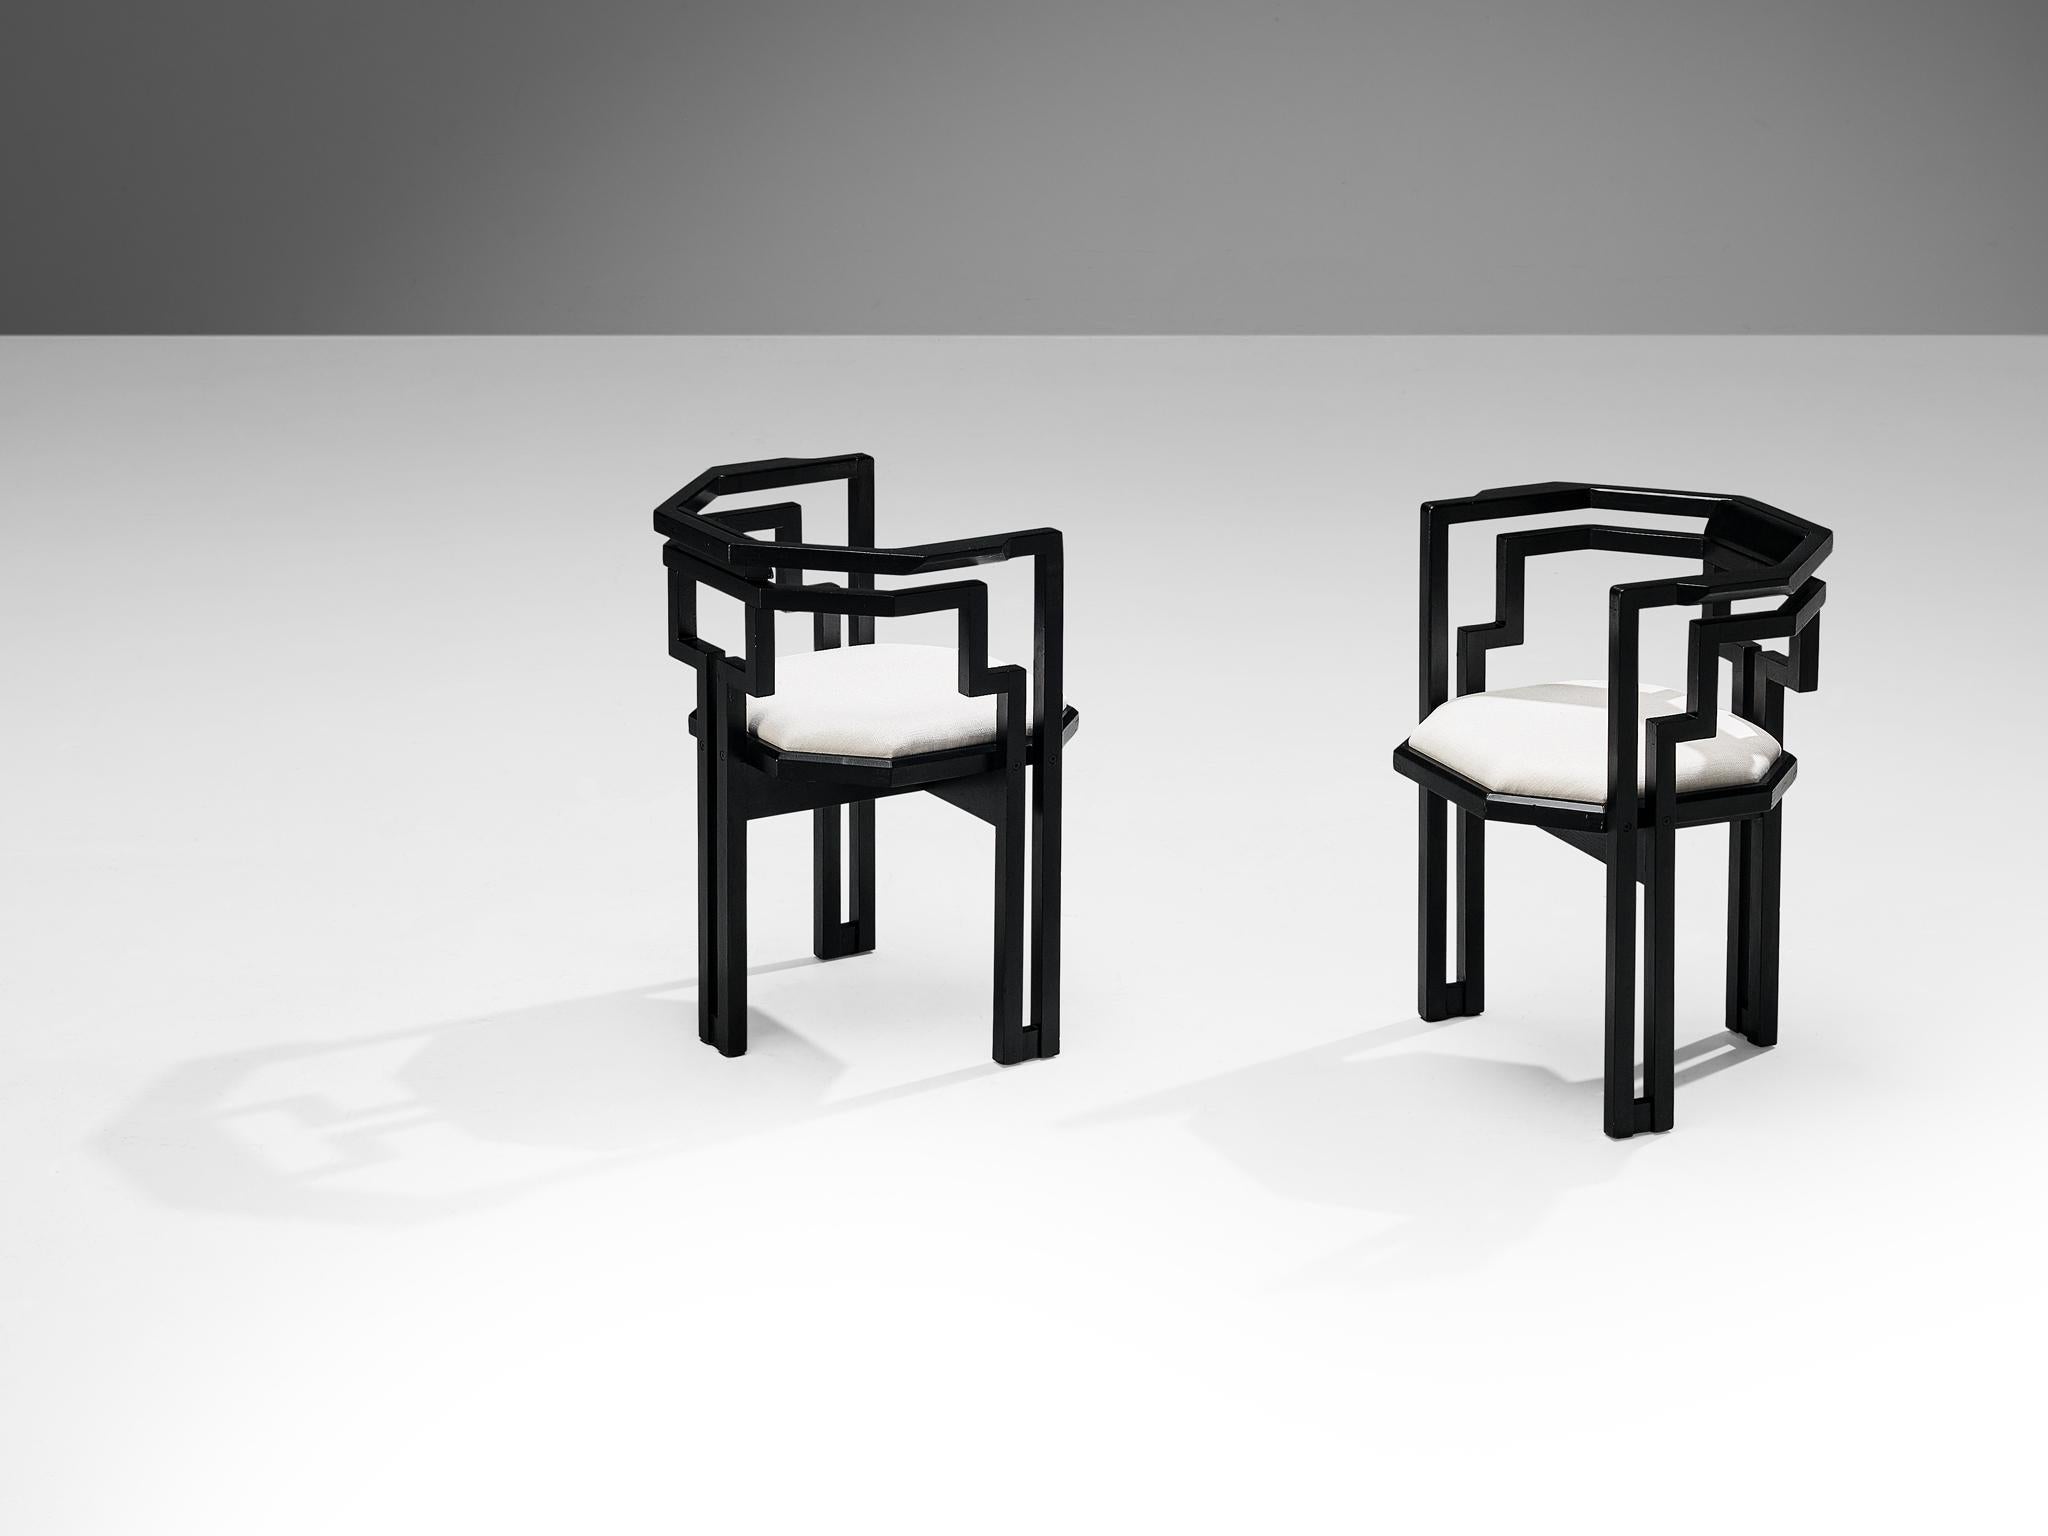 Pair of dining chairs, black lacquered oak, white fabric, Italy, 1970s.

Outstanding pair of geometric Italian dining chairs. These chairs combine a sculptural design that is simple, but very strong in lines and proportions with a luxurious feeling